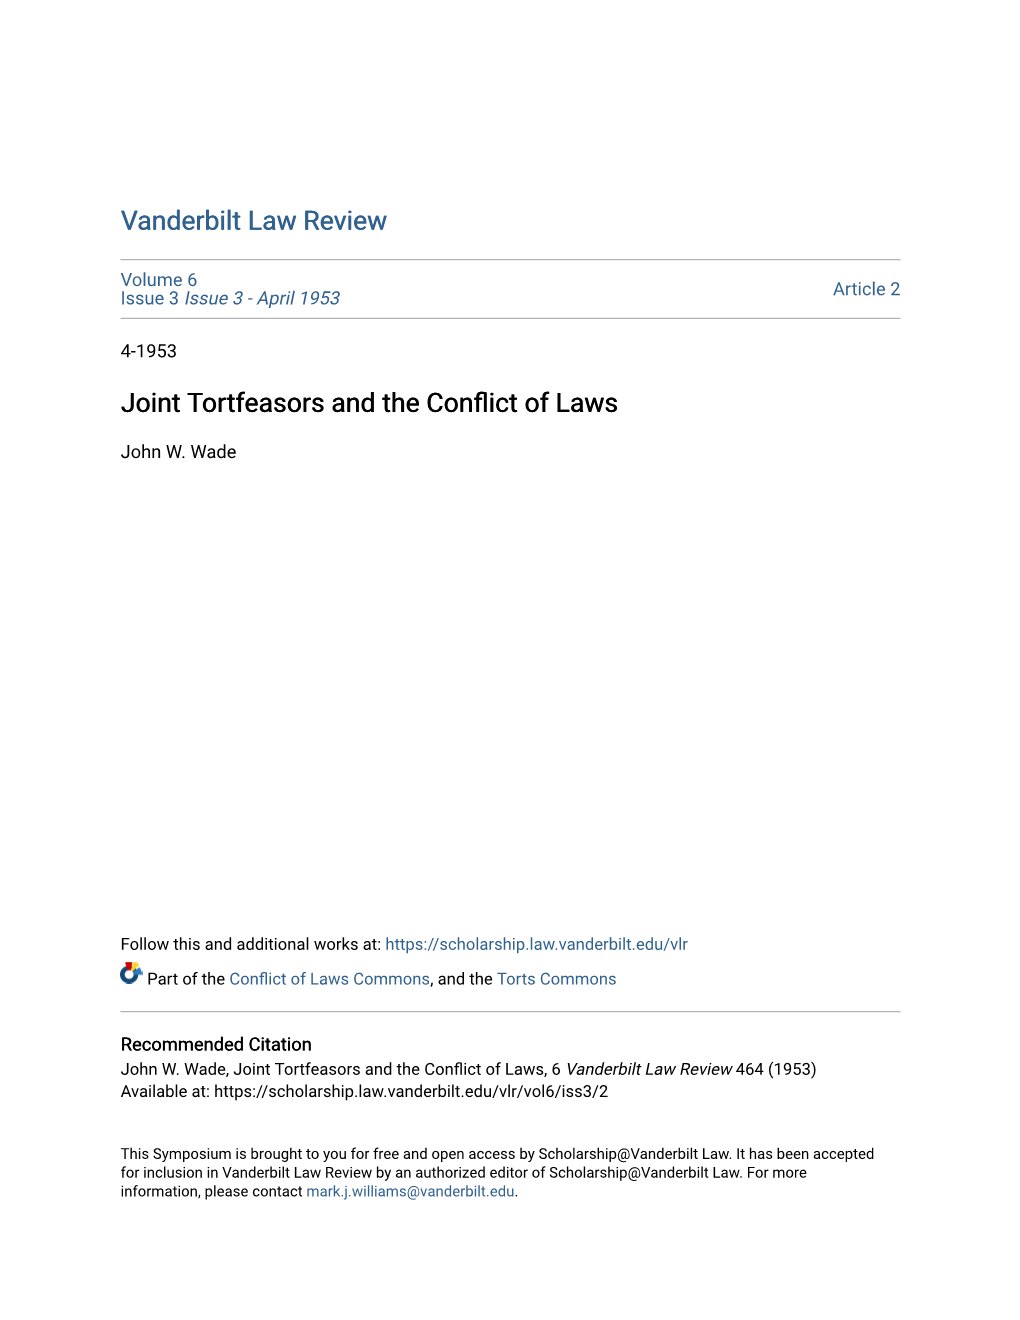 Joint Tortfeasors and the Conflict of Laws